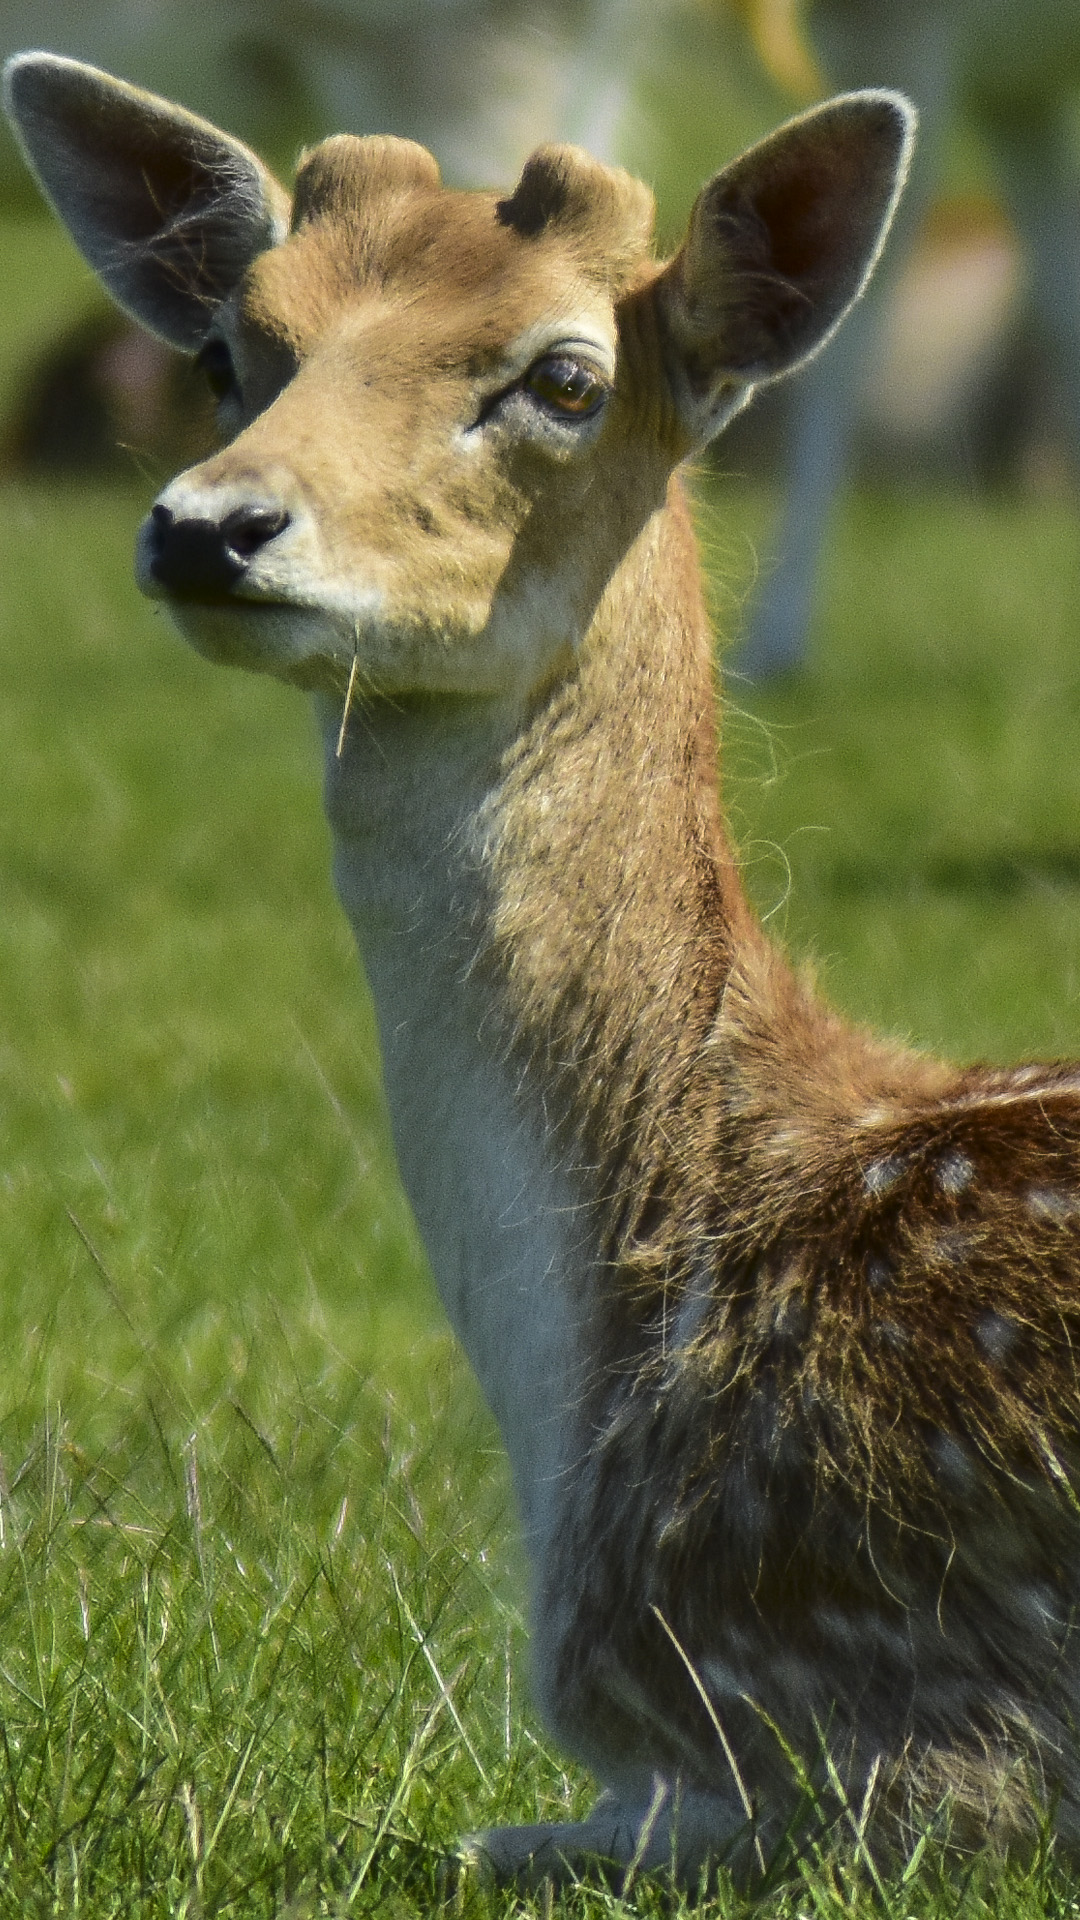 close up with a deer in Bradgate park